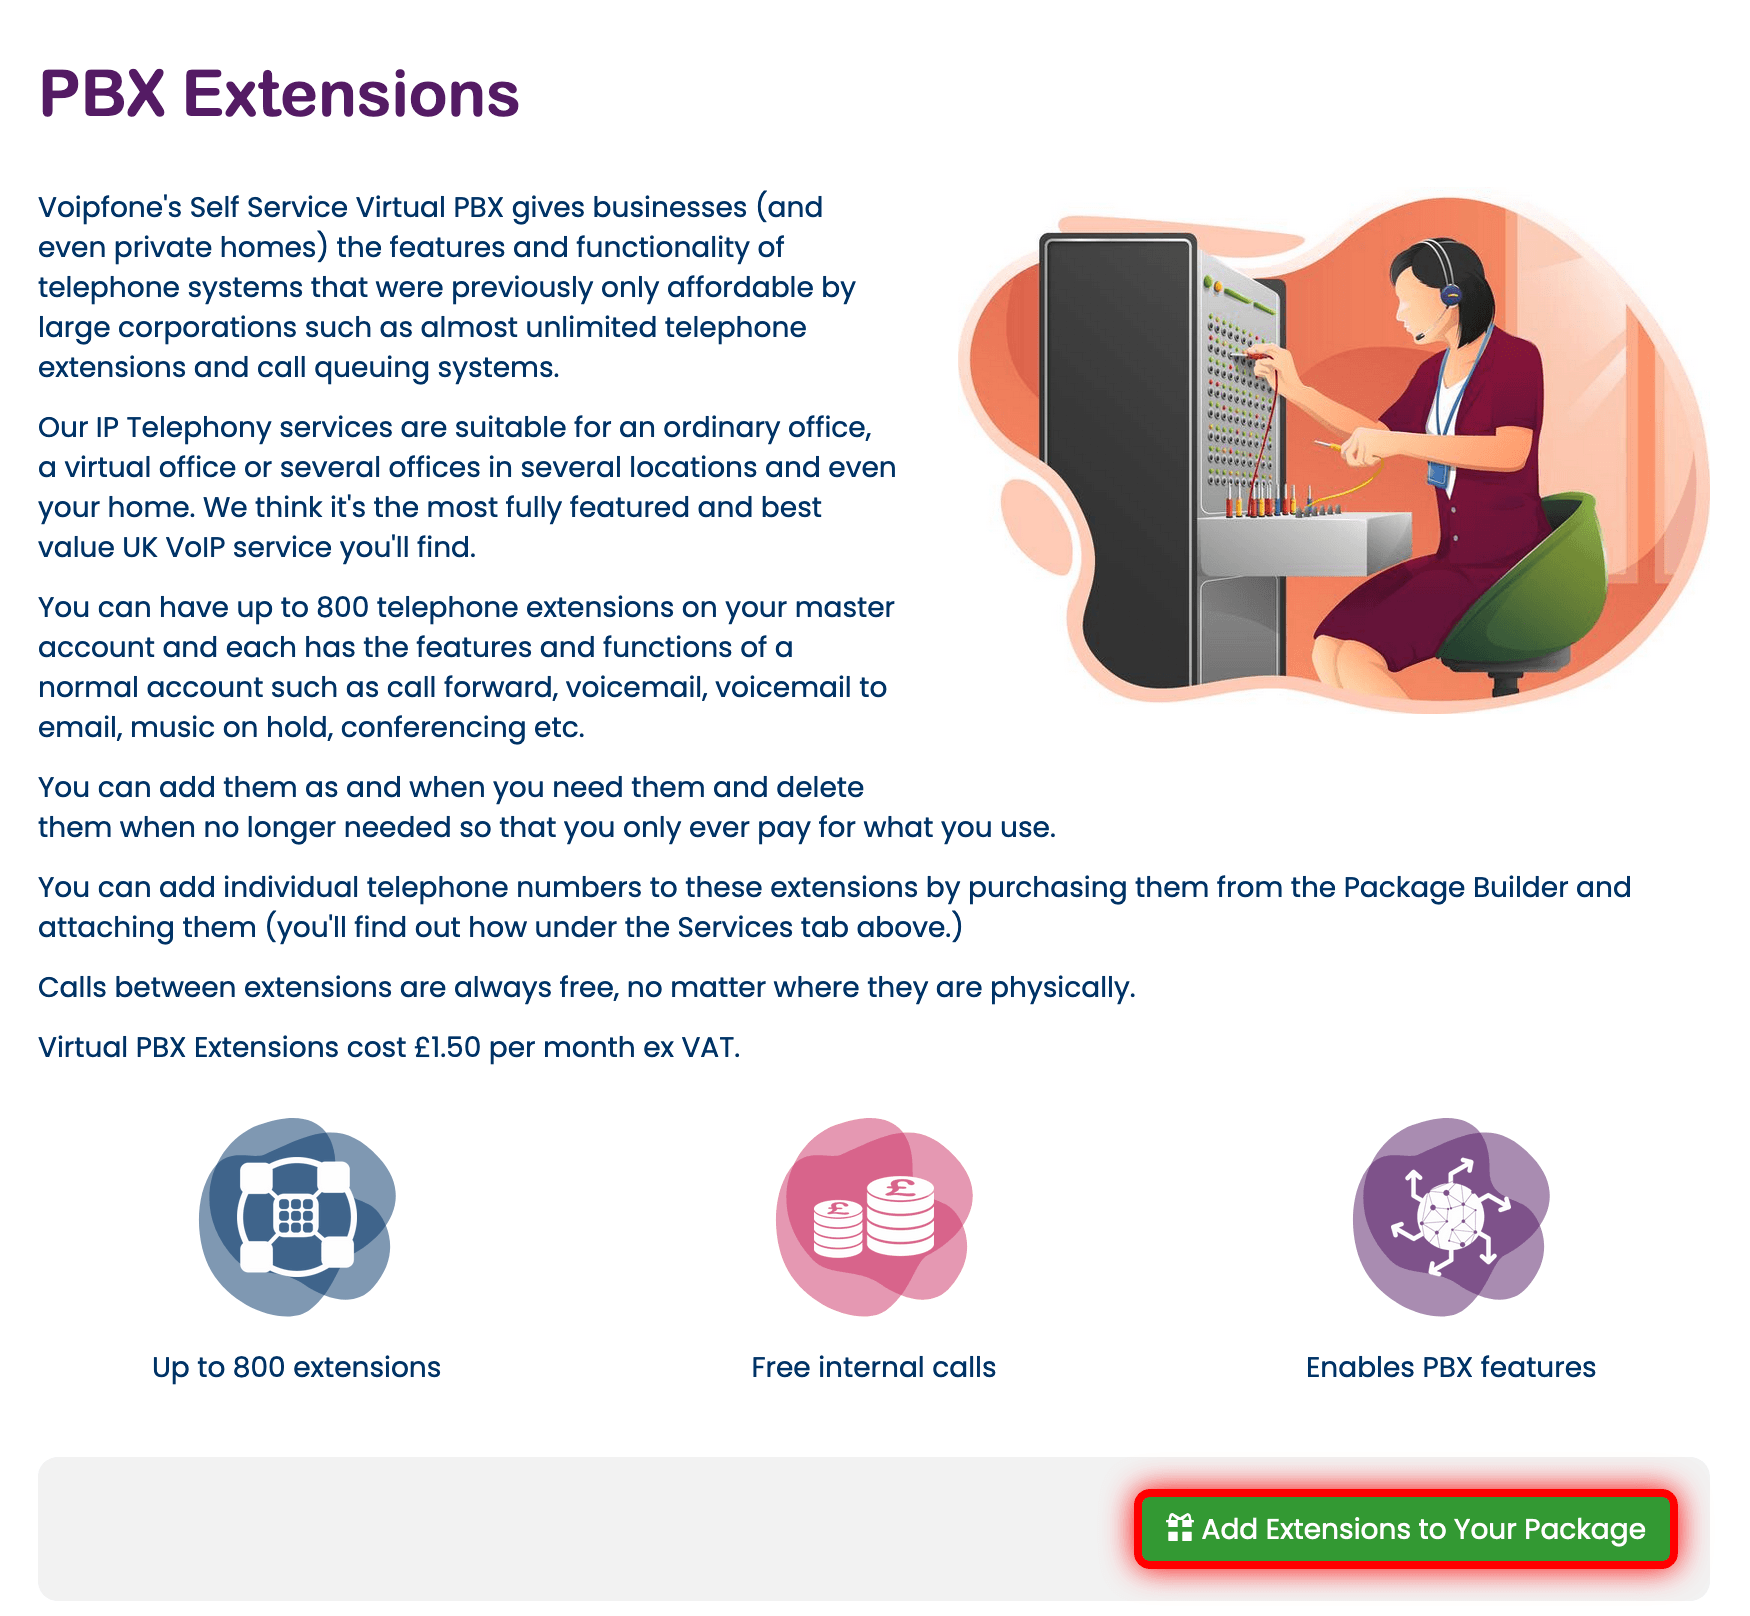 Adding PBX extensions to your package